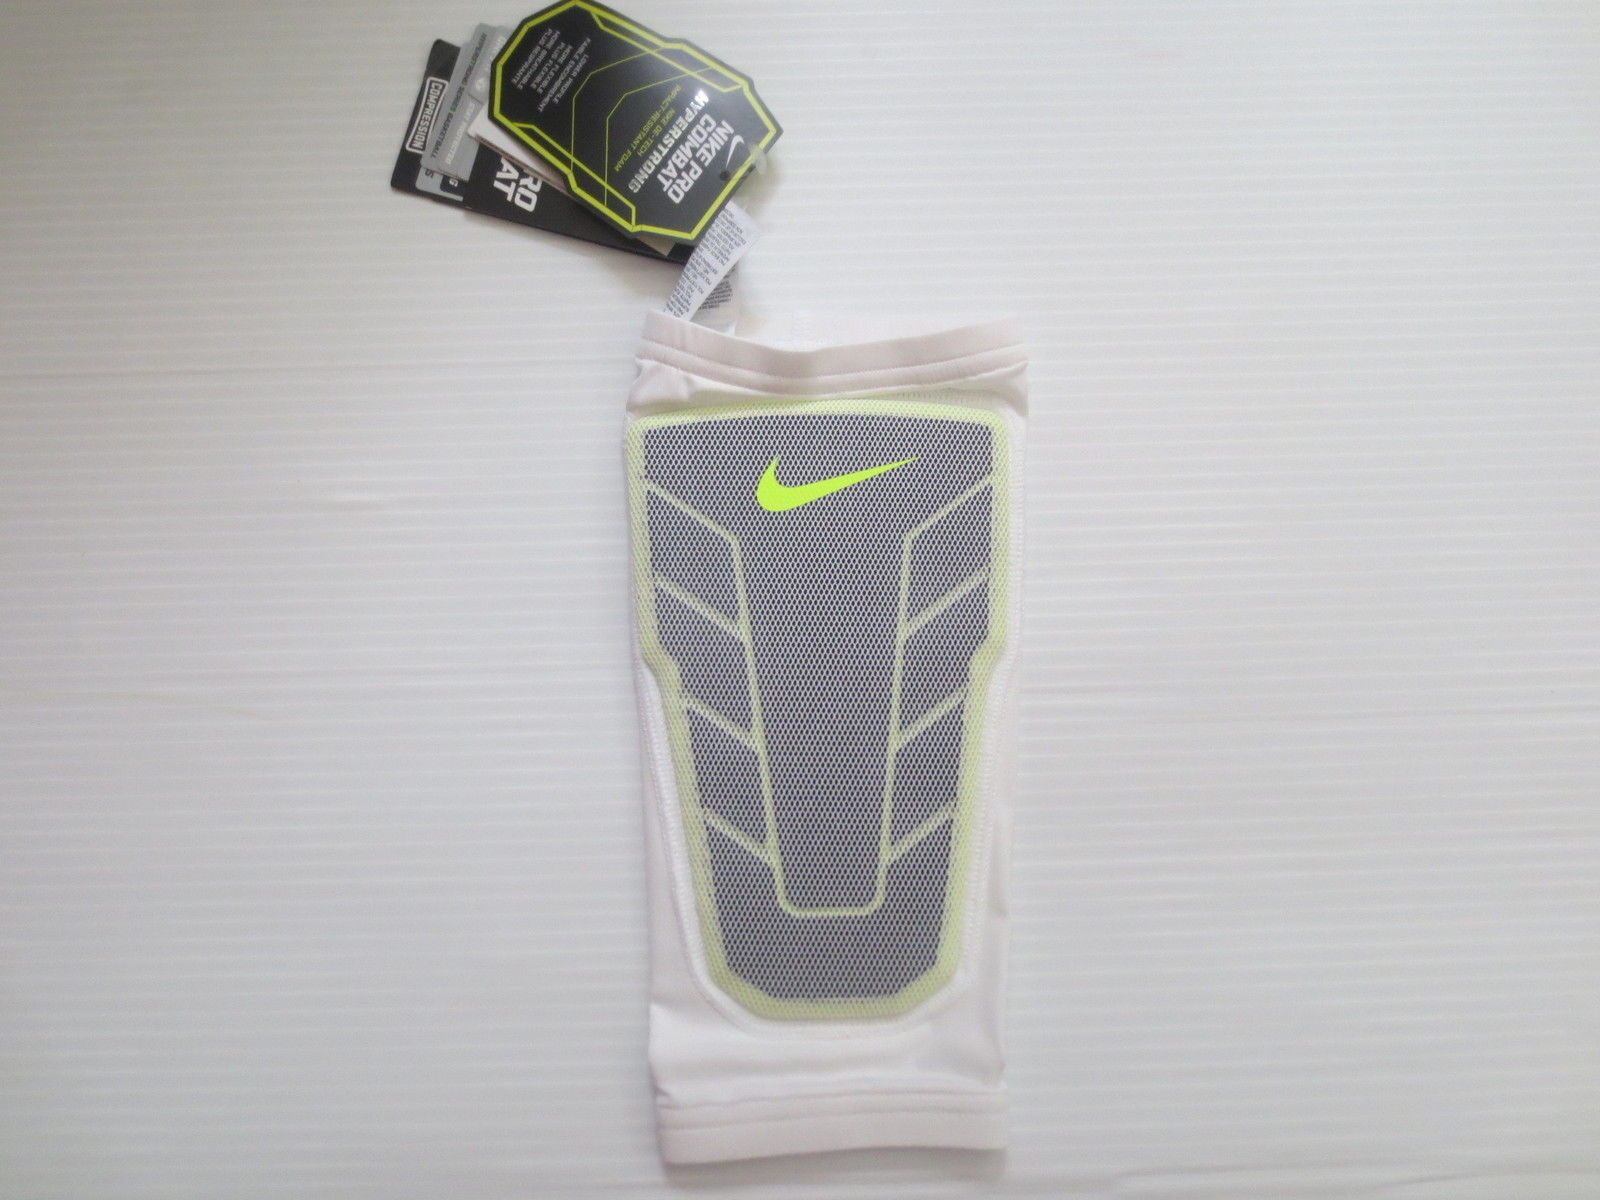 Nike Pro Combat Hyperstrong Black & Neon Green Compression Shin